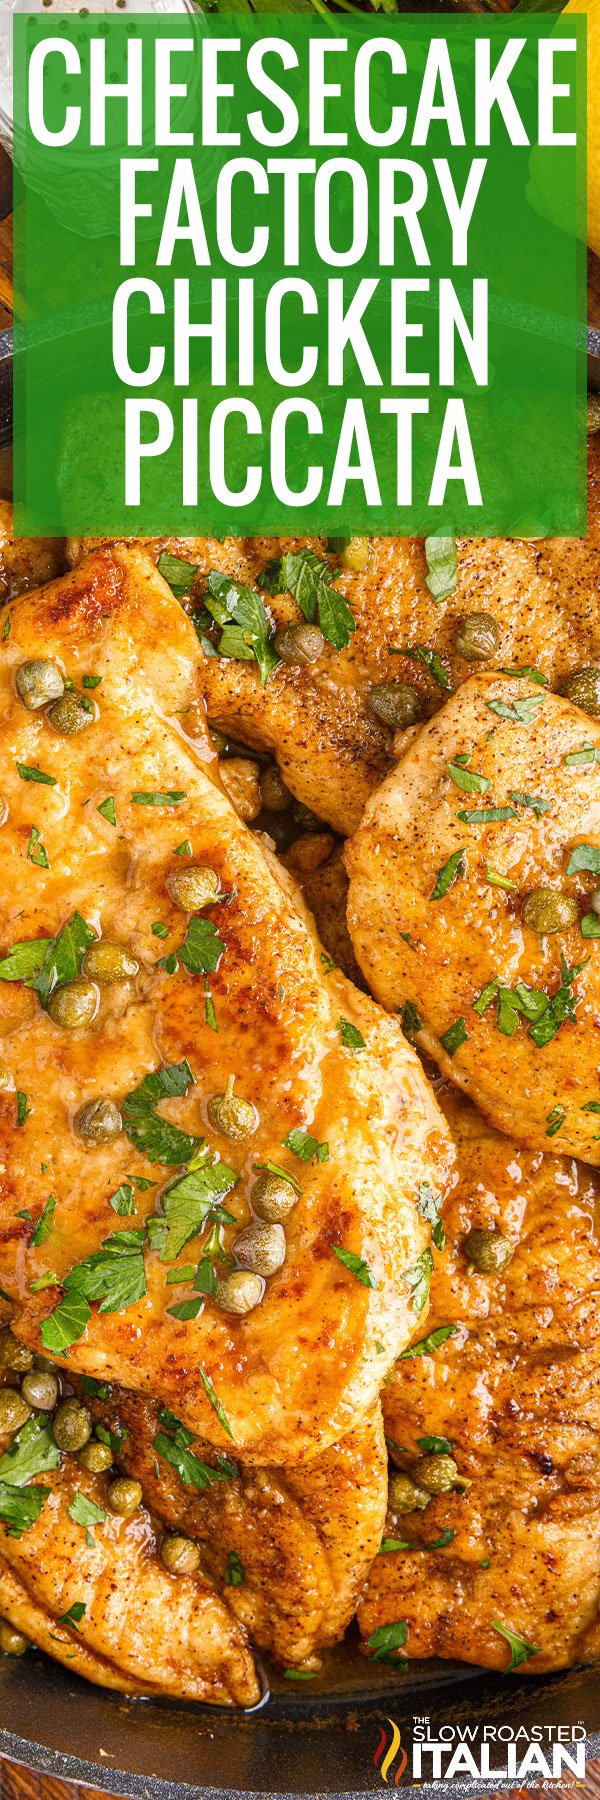 titled image (and shown): chicken piccata Cheesecake Factory copycat